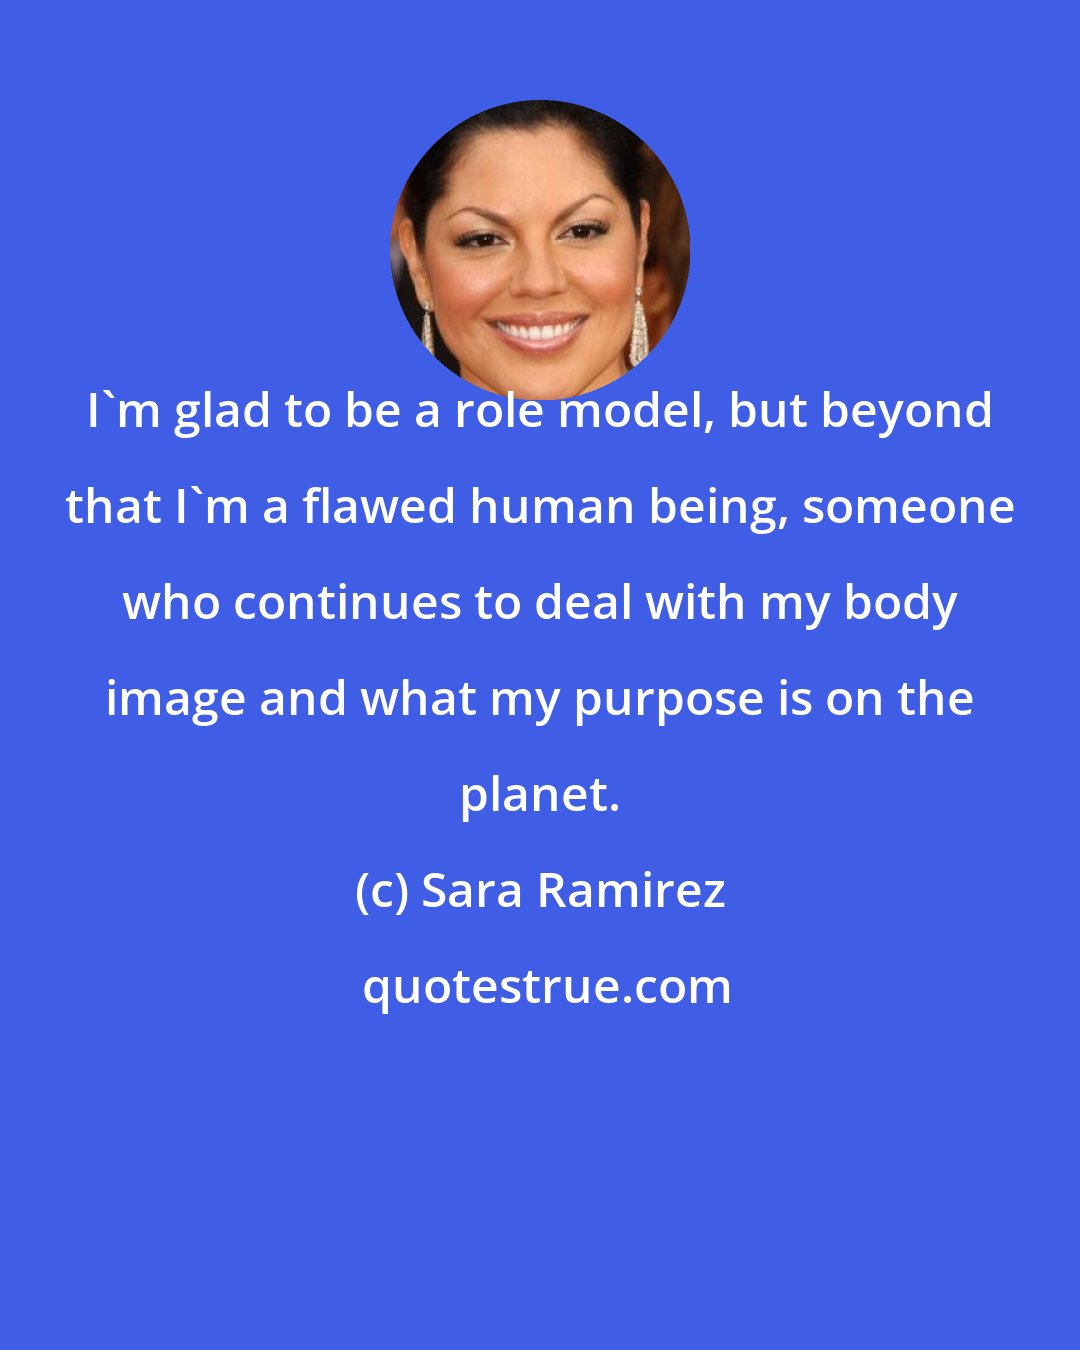 Sara Ramirez: I'm glad to be a role model, but beyond that I'm a flawed human being, someone who continues to deal with my body image and what my purpose is on the planet.